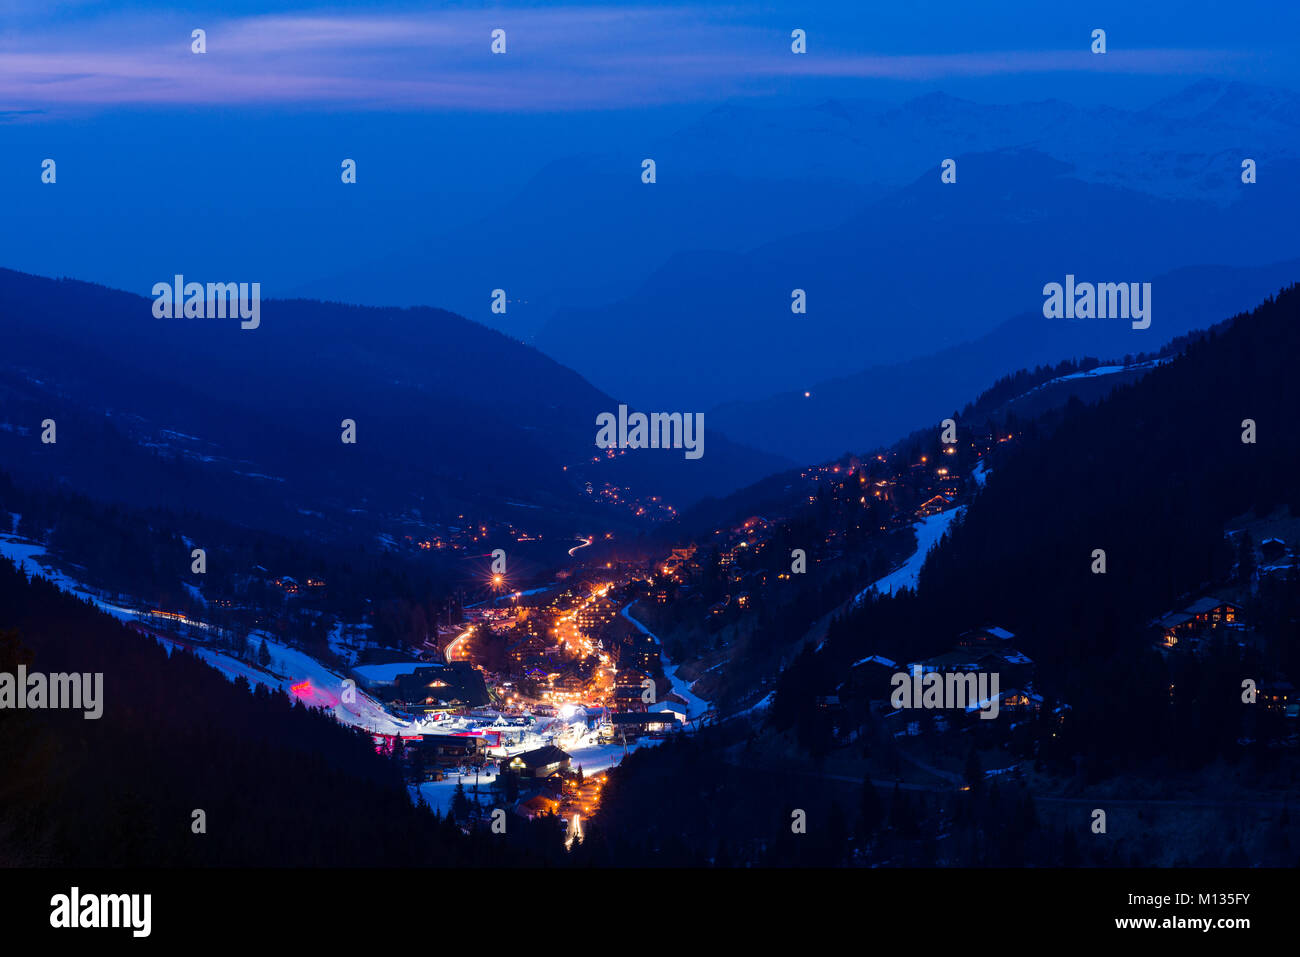 The ski resort town of Meribel and the 3 Valleys mountain area at dusk, France Stock Photo